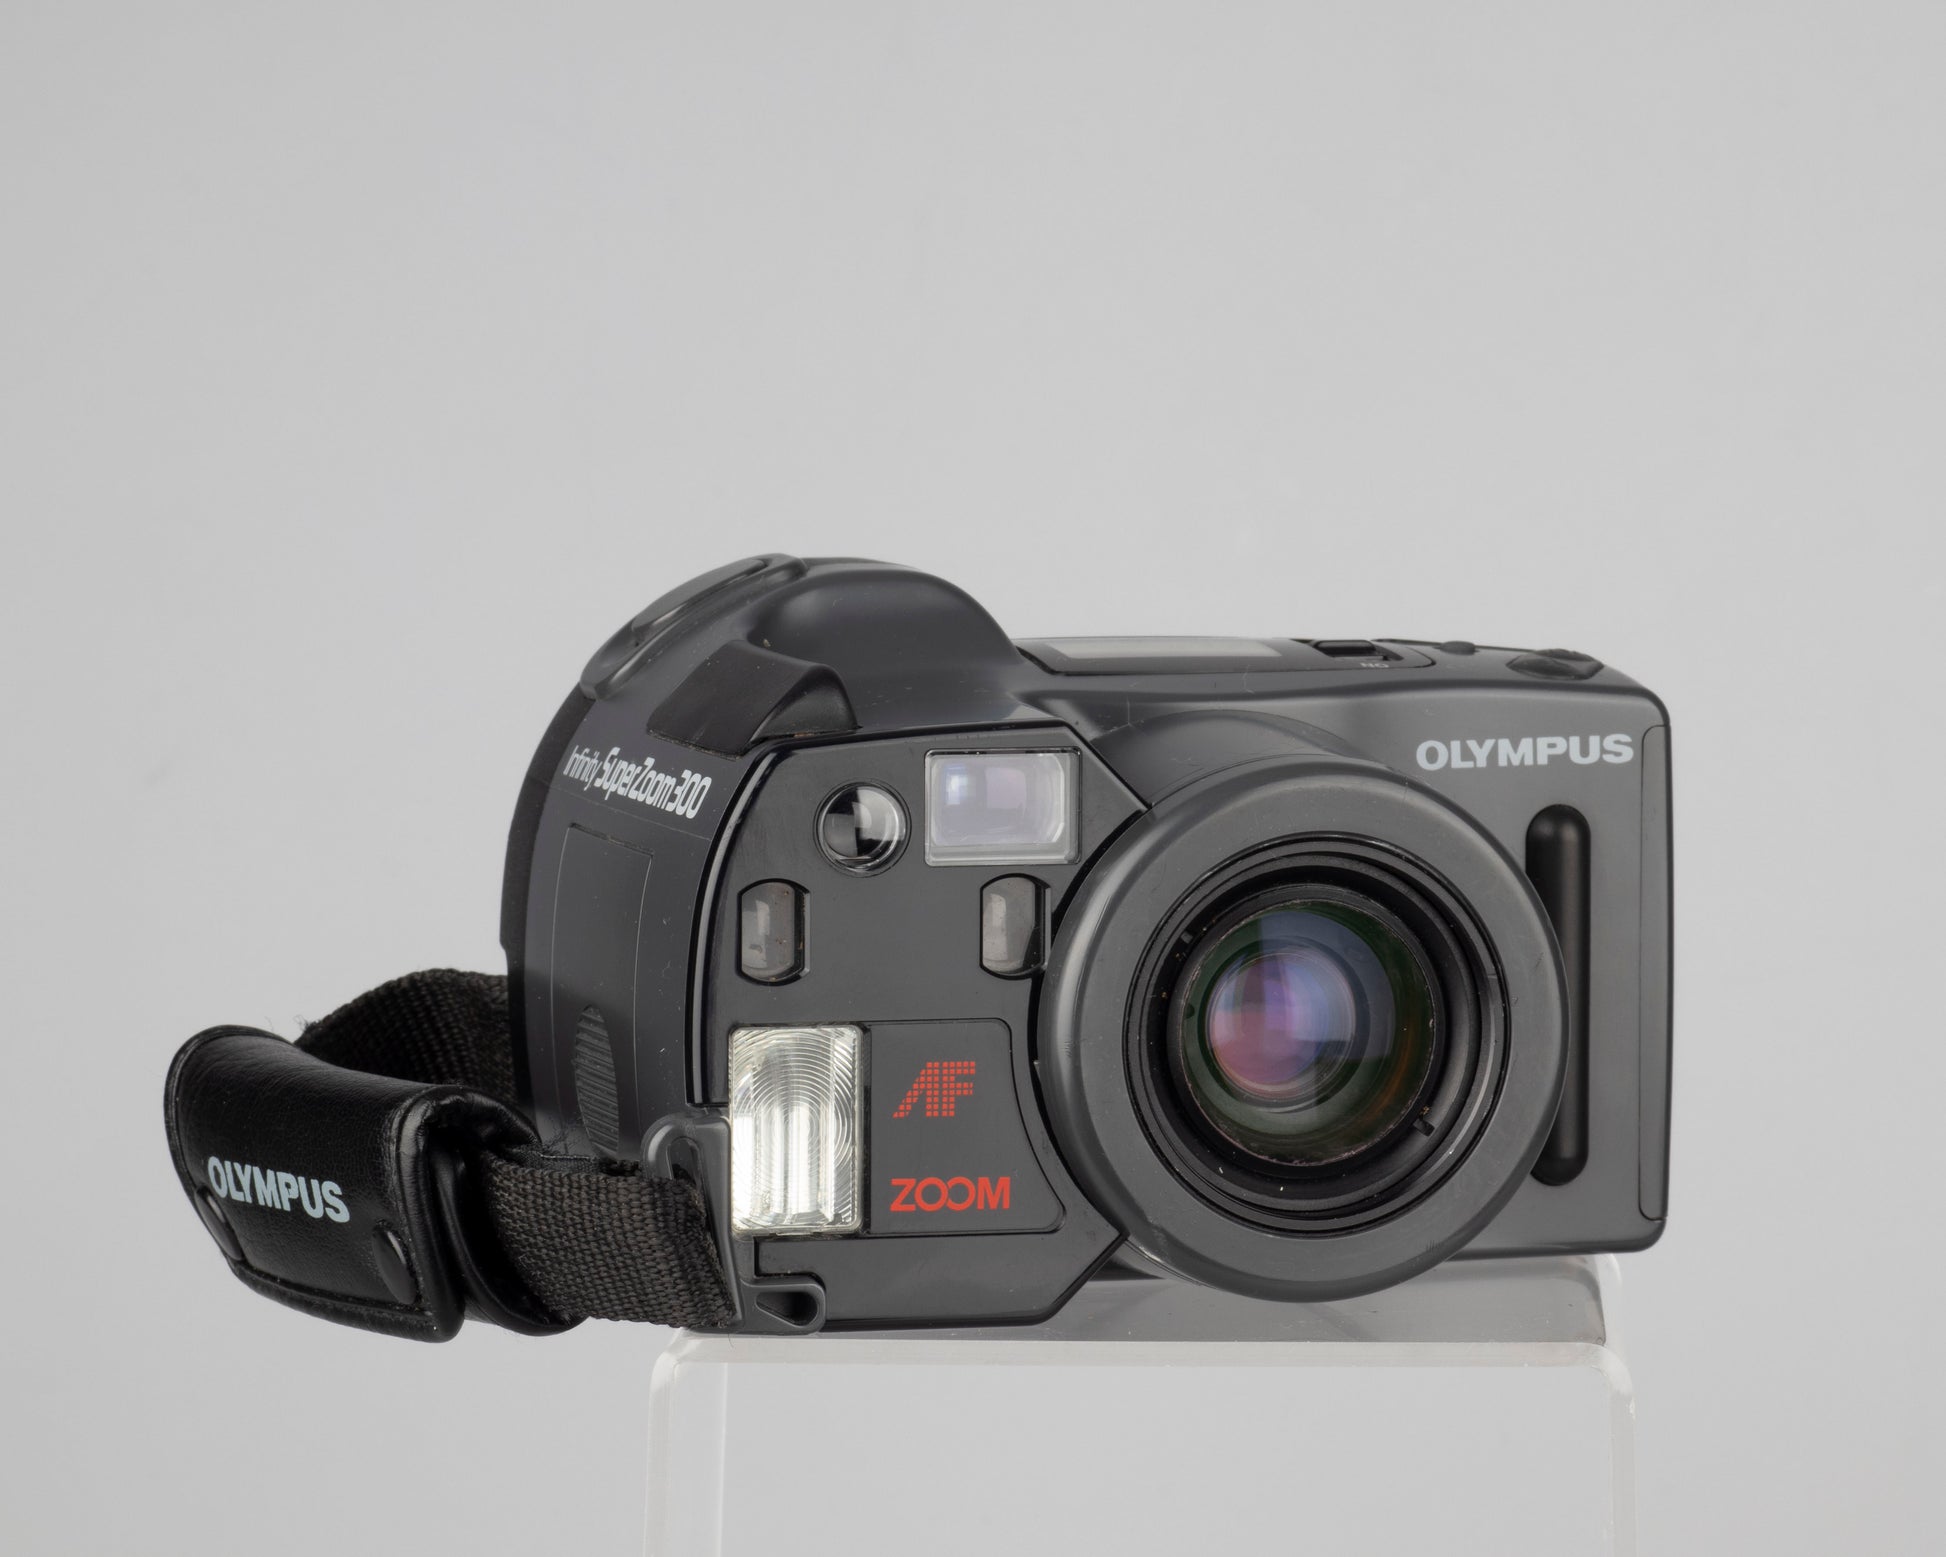 The Olympus Infinity SuperZoom 300 is one of original 35mm 'bridge' cameras--offering point-and-shoot ease of use with the advanced optics and features typically found in an SLR